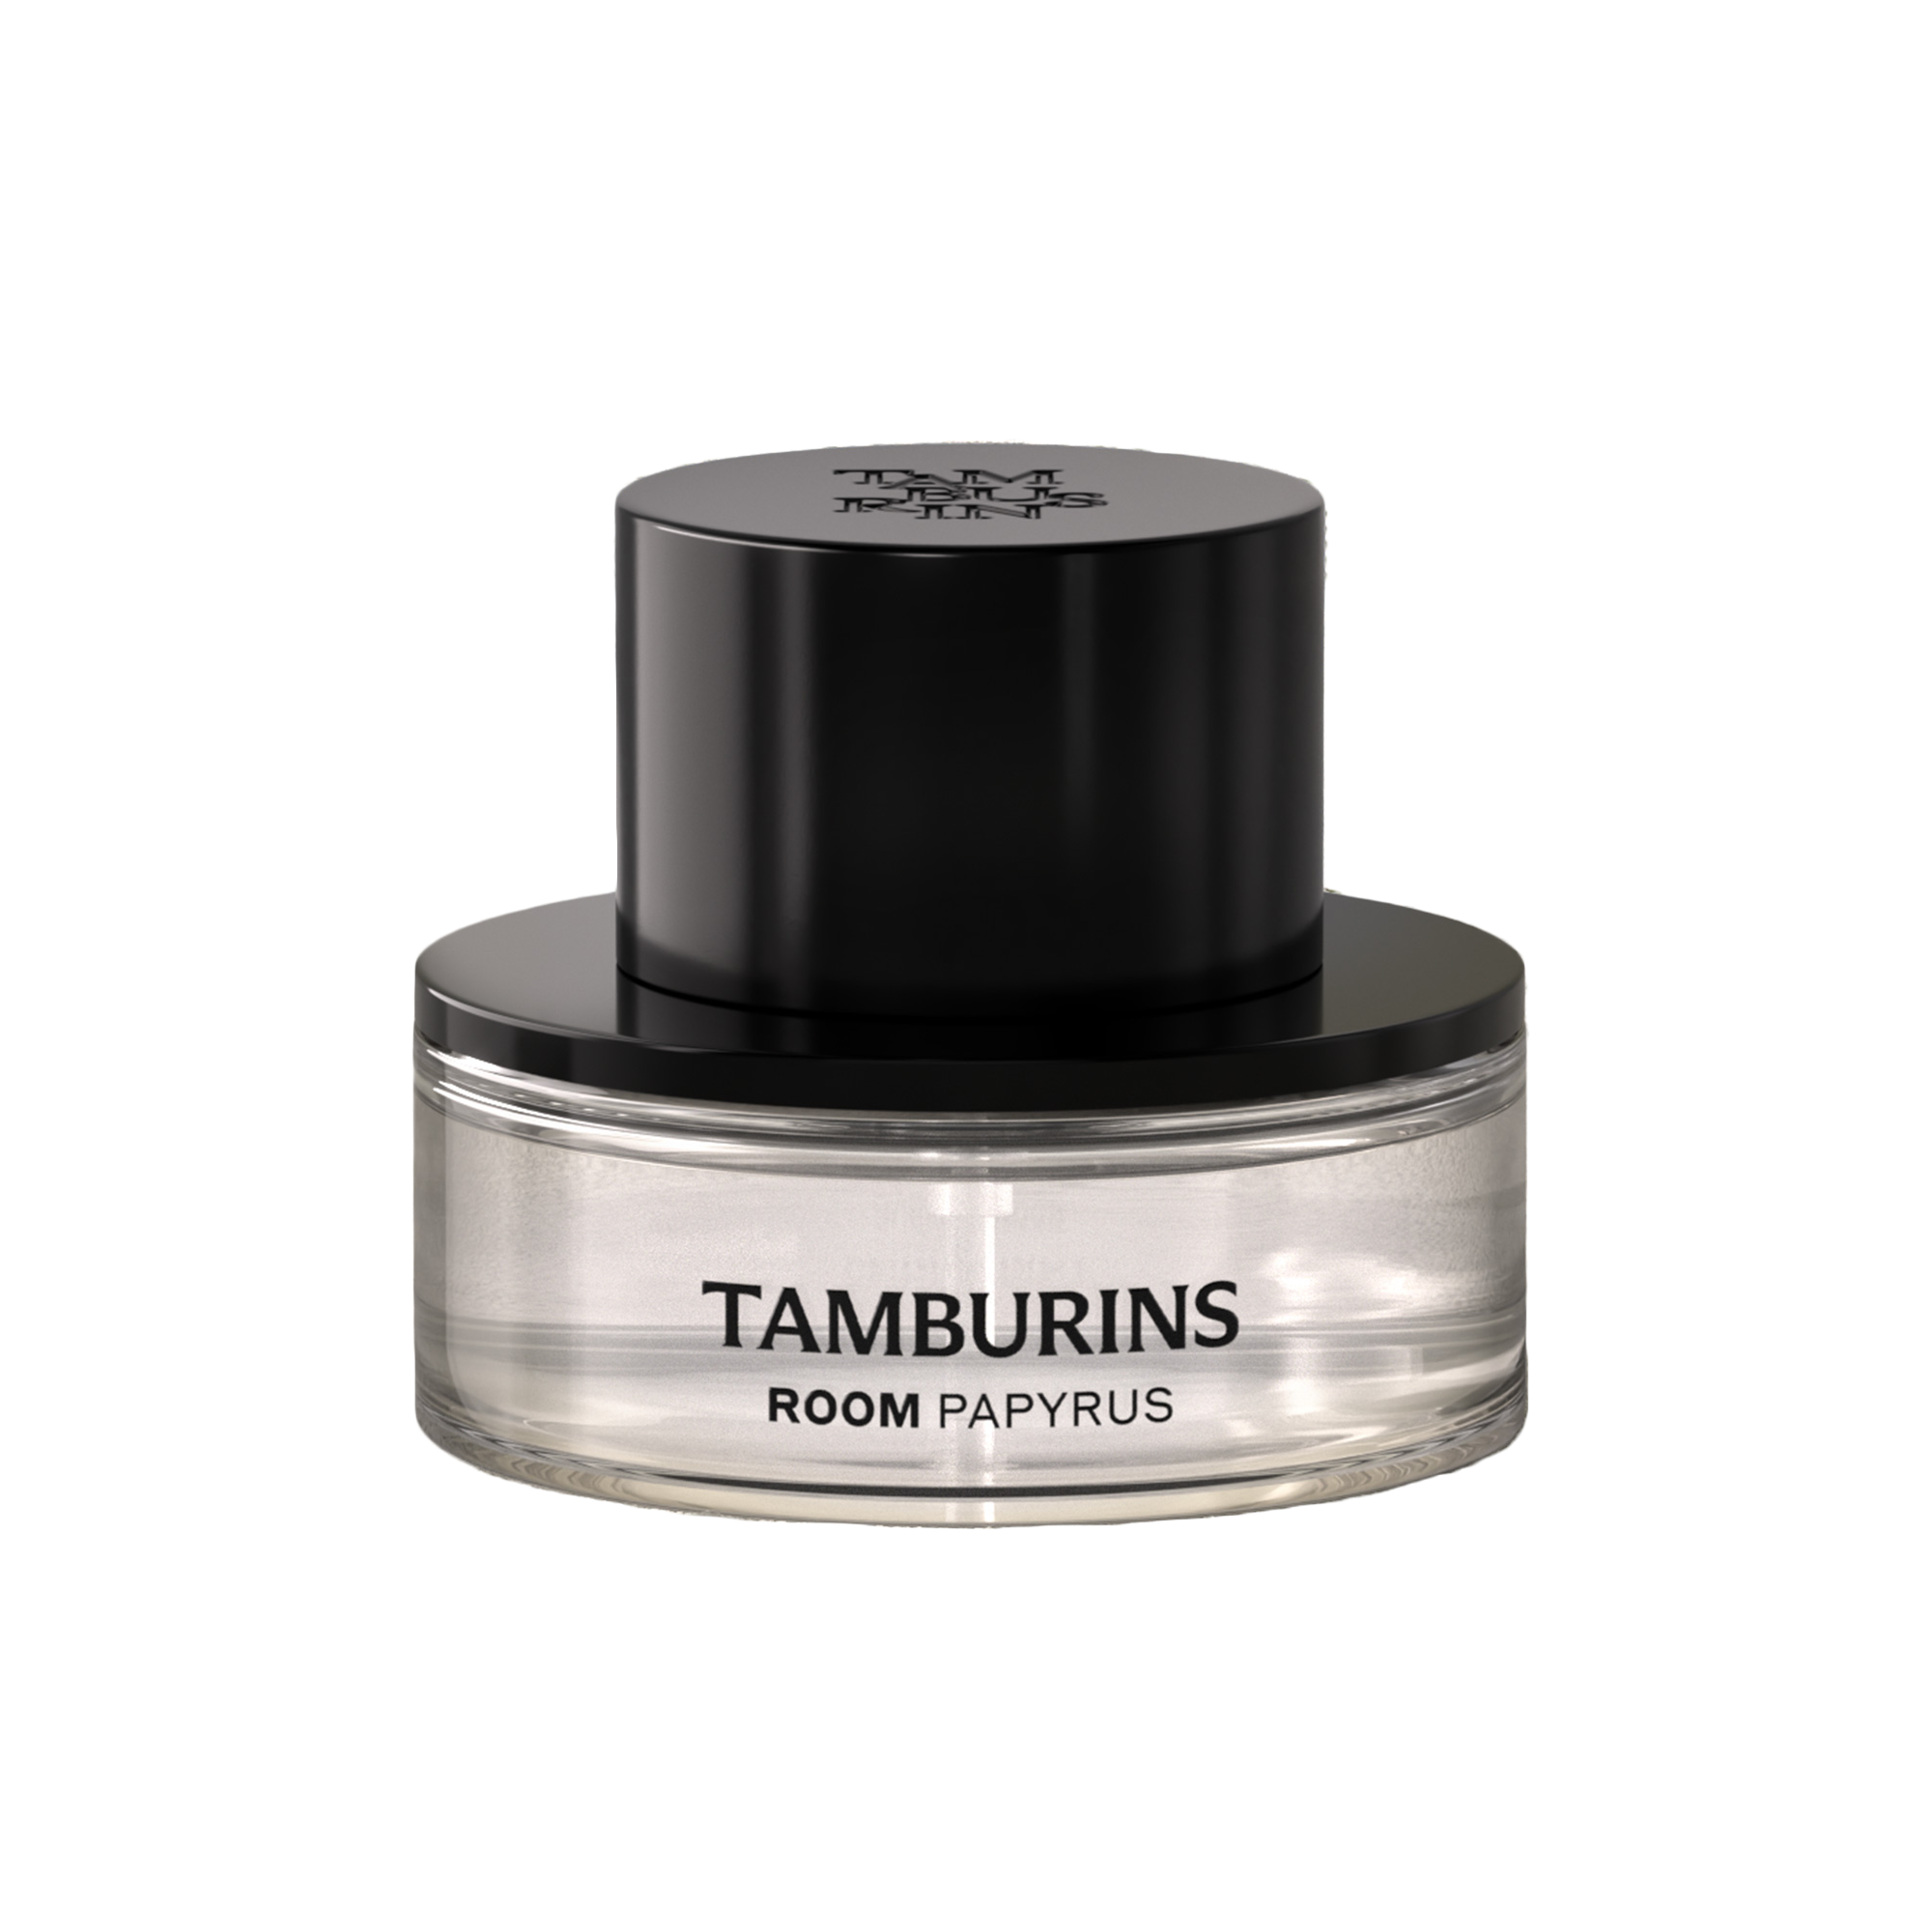 TAMBURINS Room Spray 90ml: A refreshing and invigorating scent for your living space. Transform your room with just a spritz!